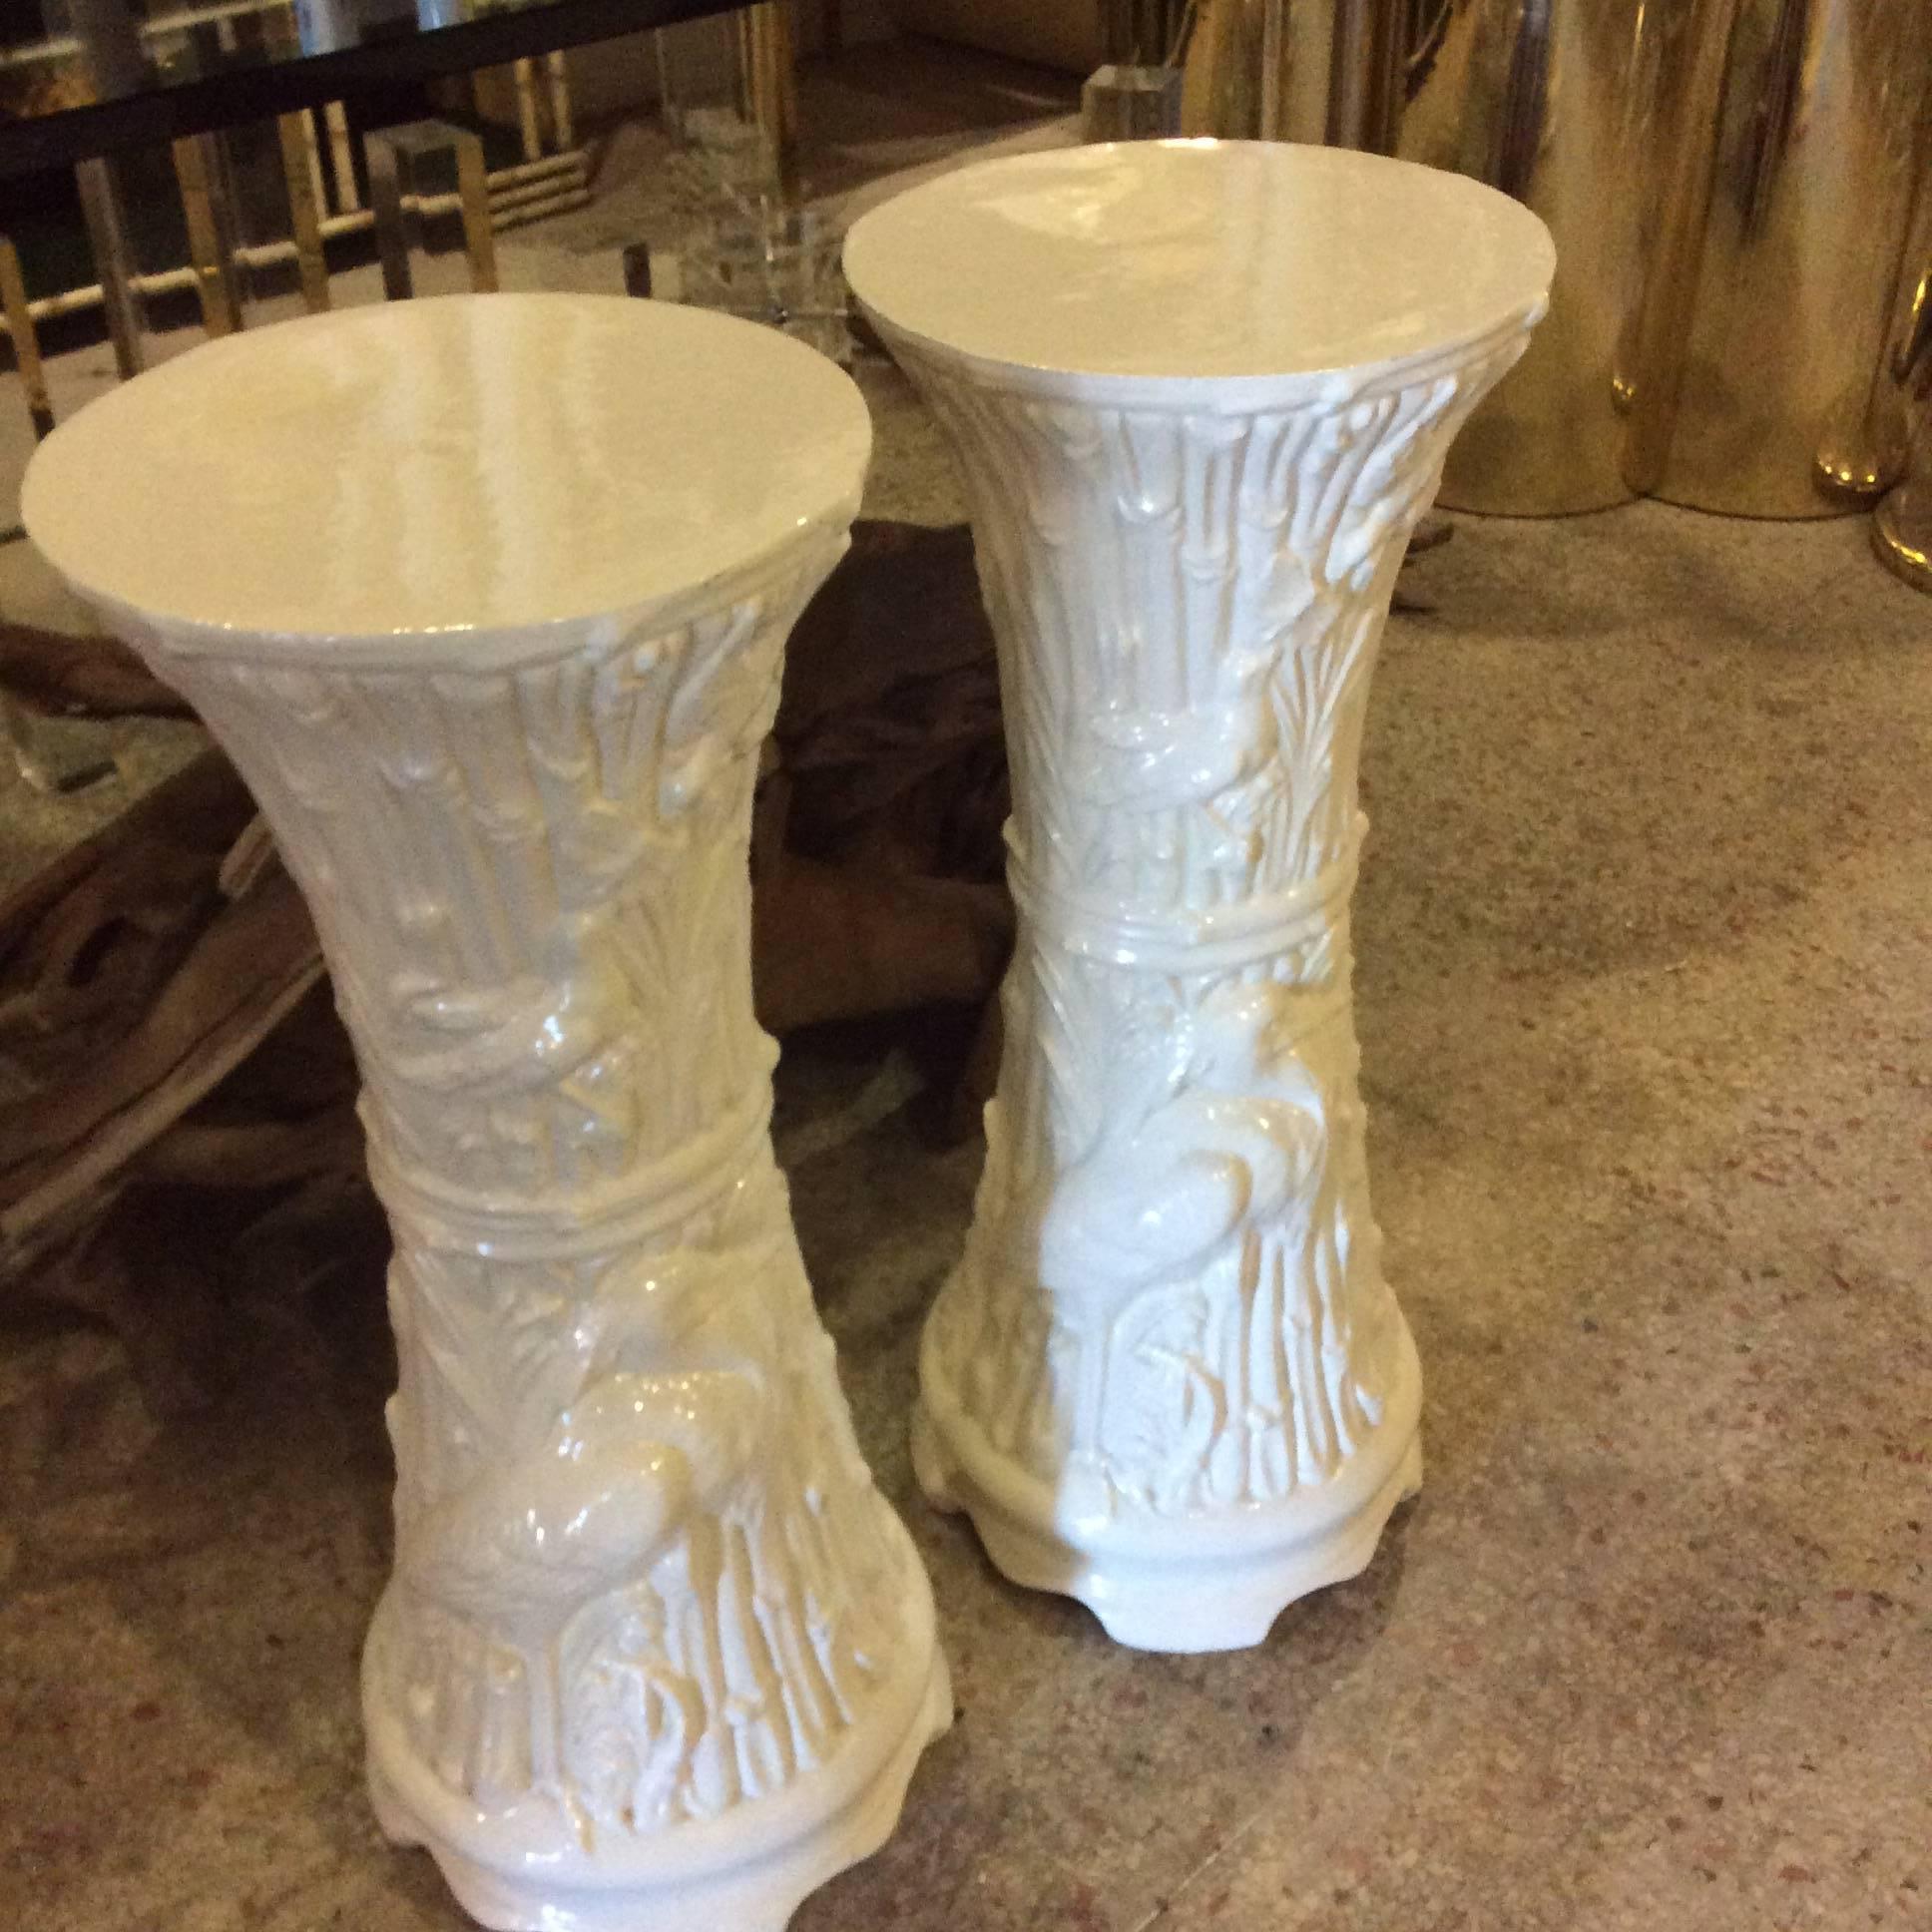 Lovely pair of vintage Hollywood Regency chinoiserie, white ceramic plant or garden stands with faux bamboo, birds, White Heron, leaves, etc motiff. Perfect as stands or tables. Great faux bamboo design details for a tropical palm beach feel.